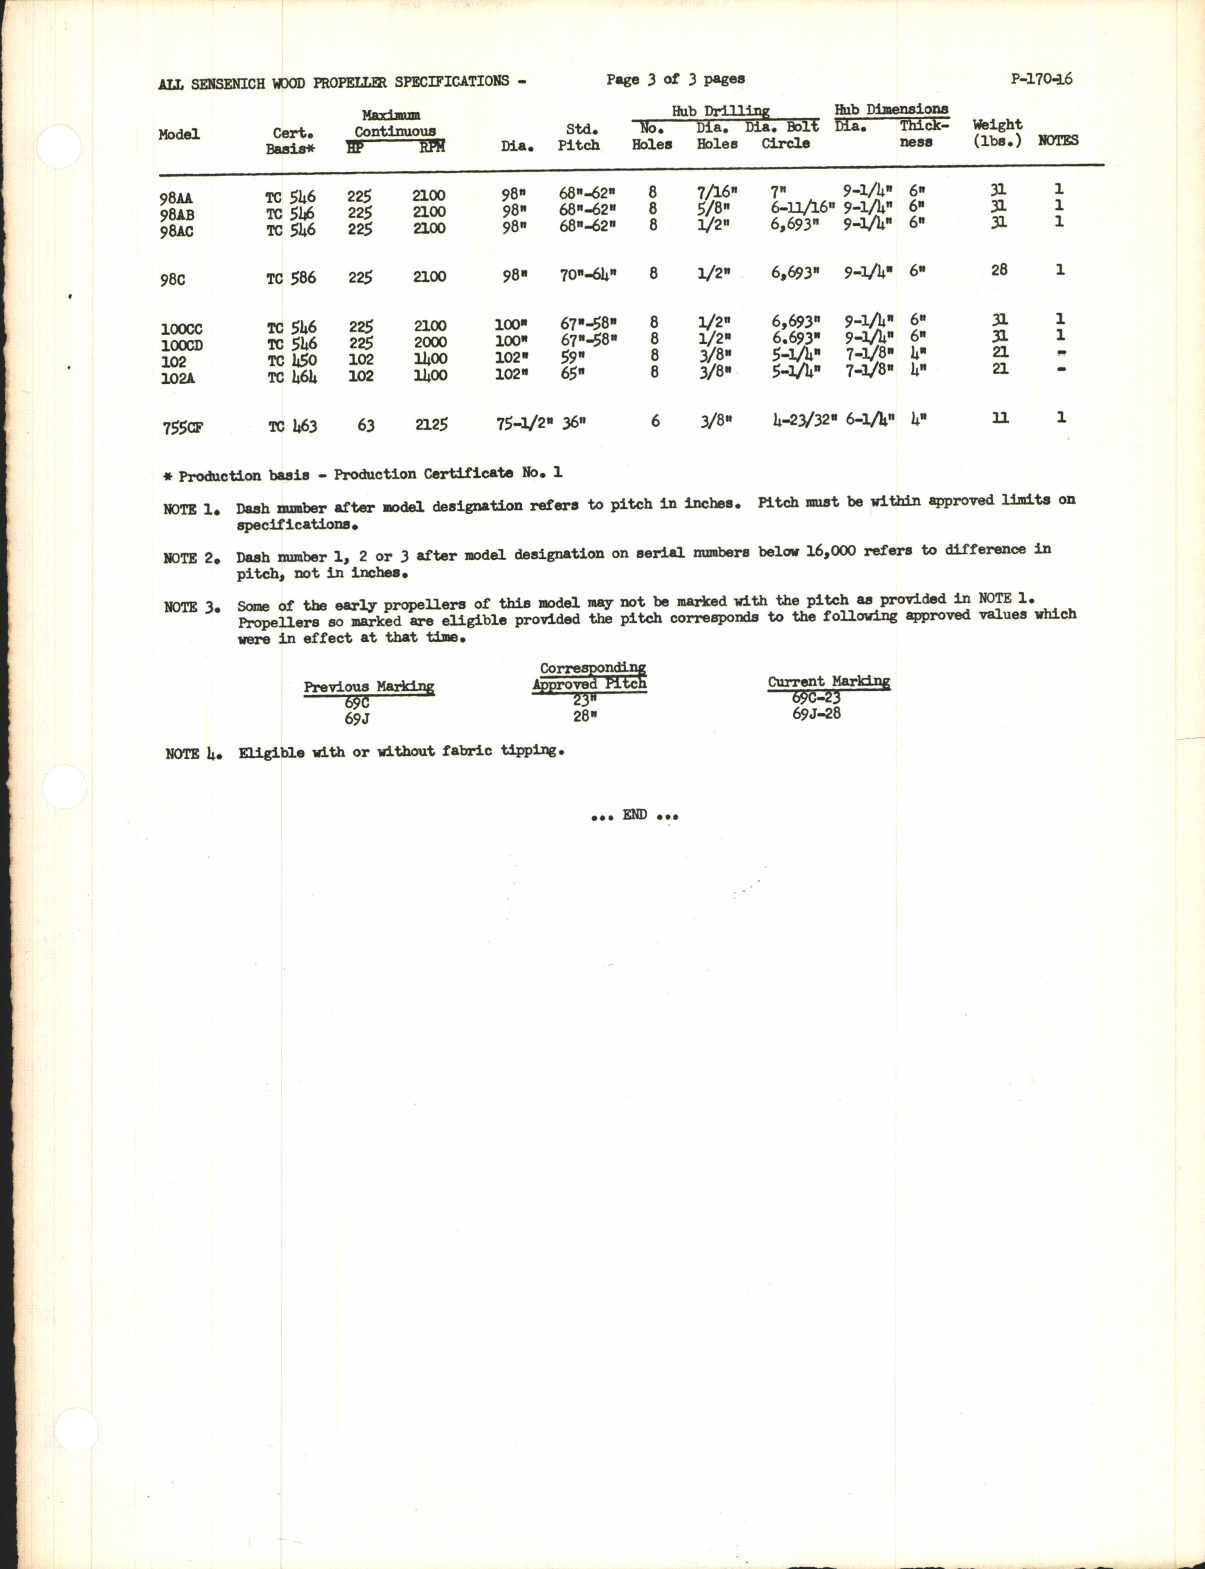 Sample page  3 from AirCorps Library document: All Wood Propellers